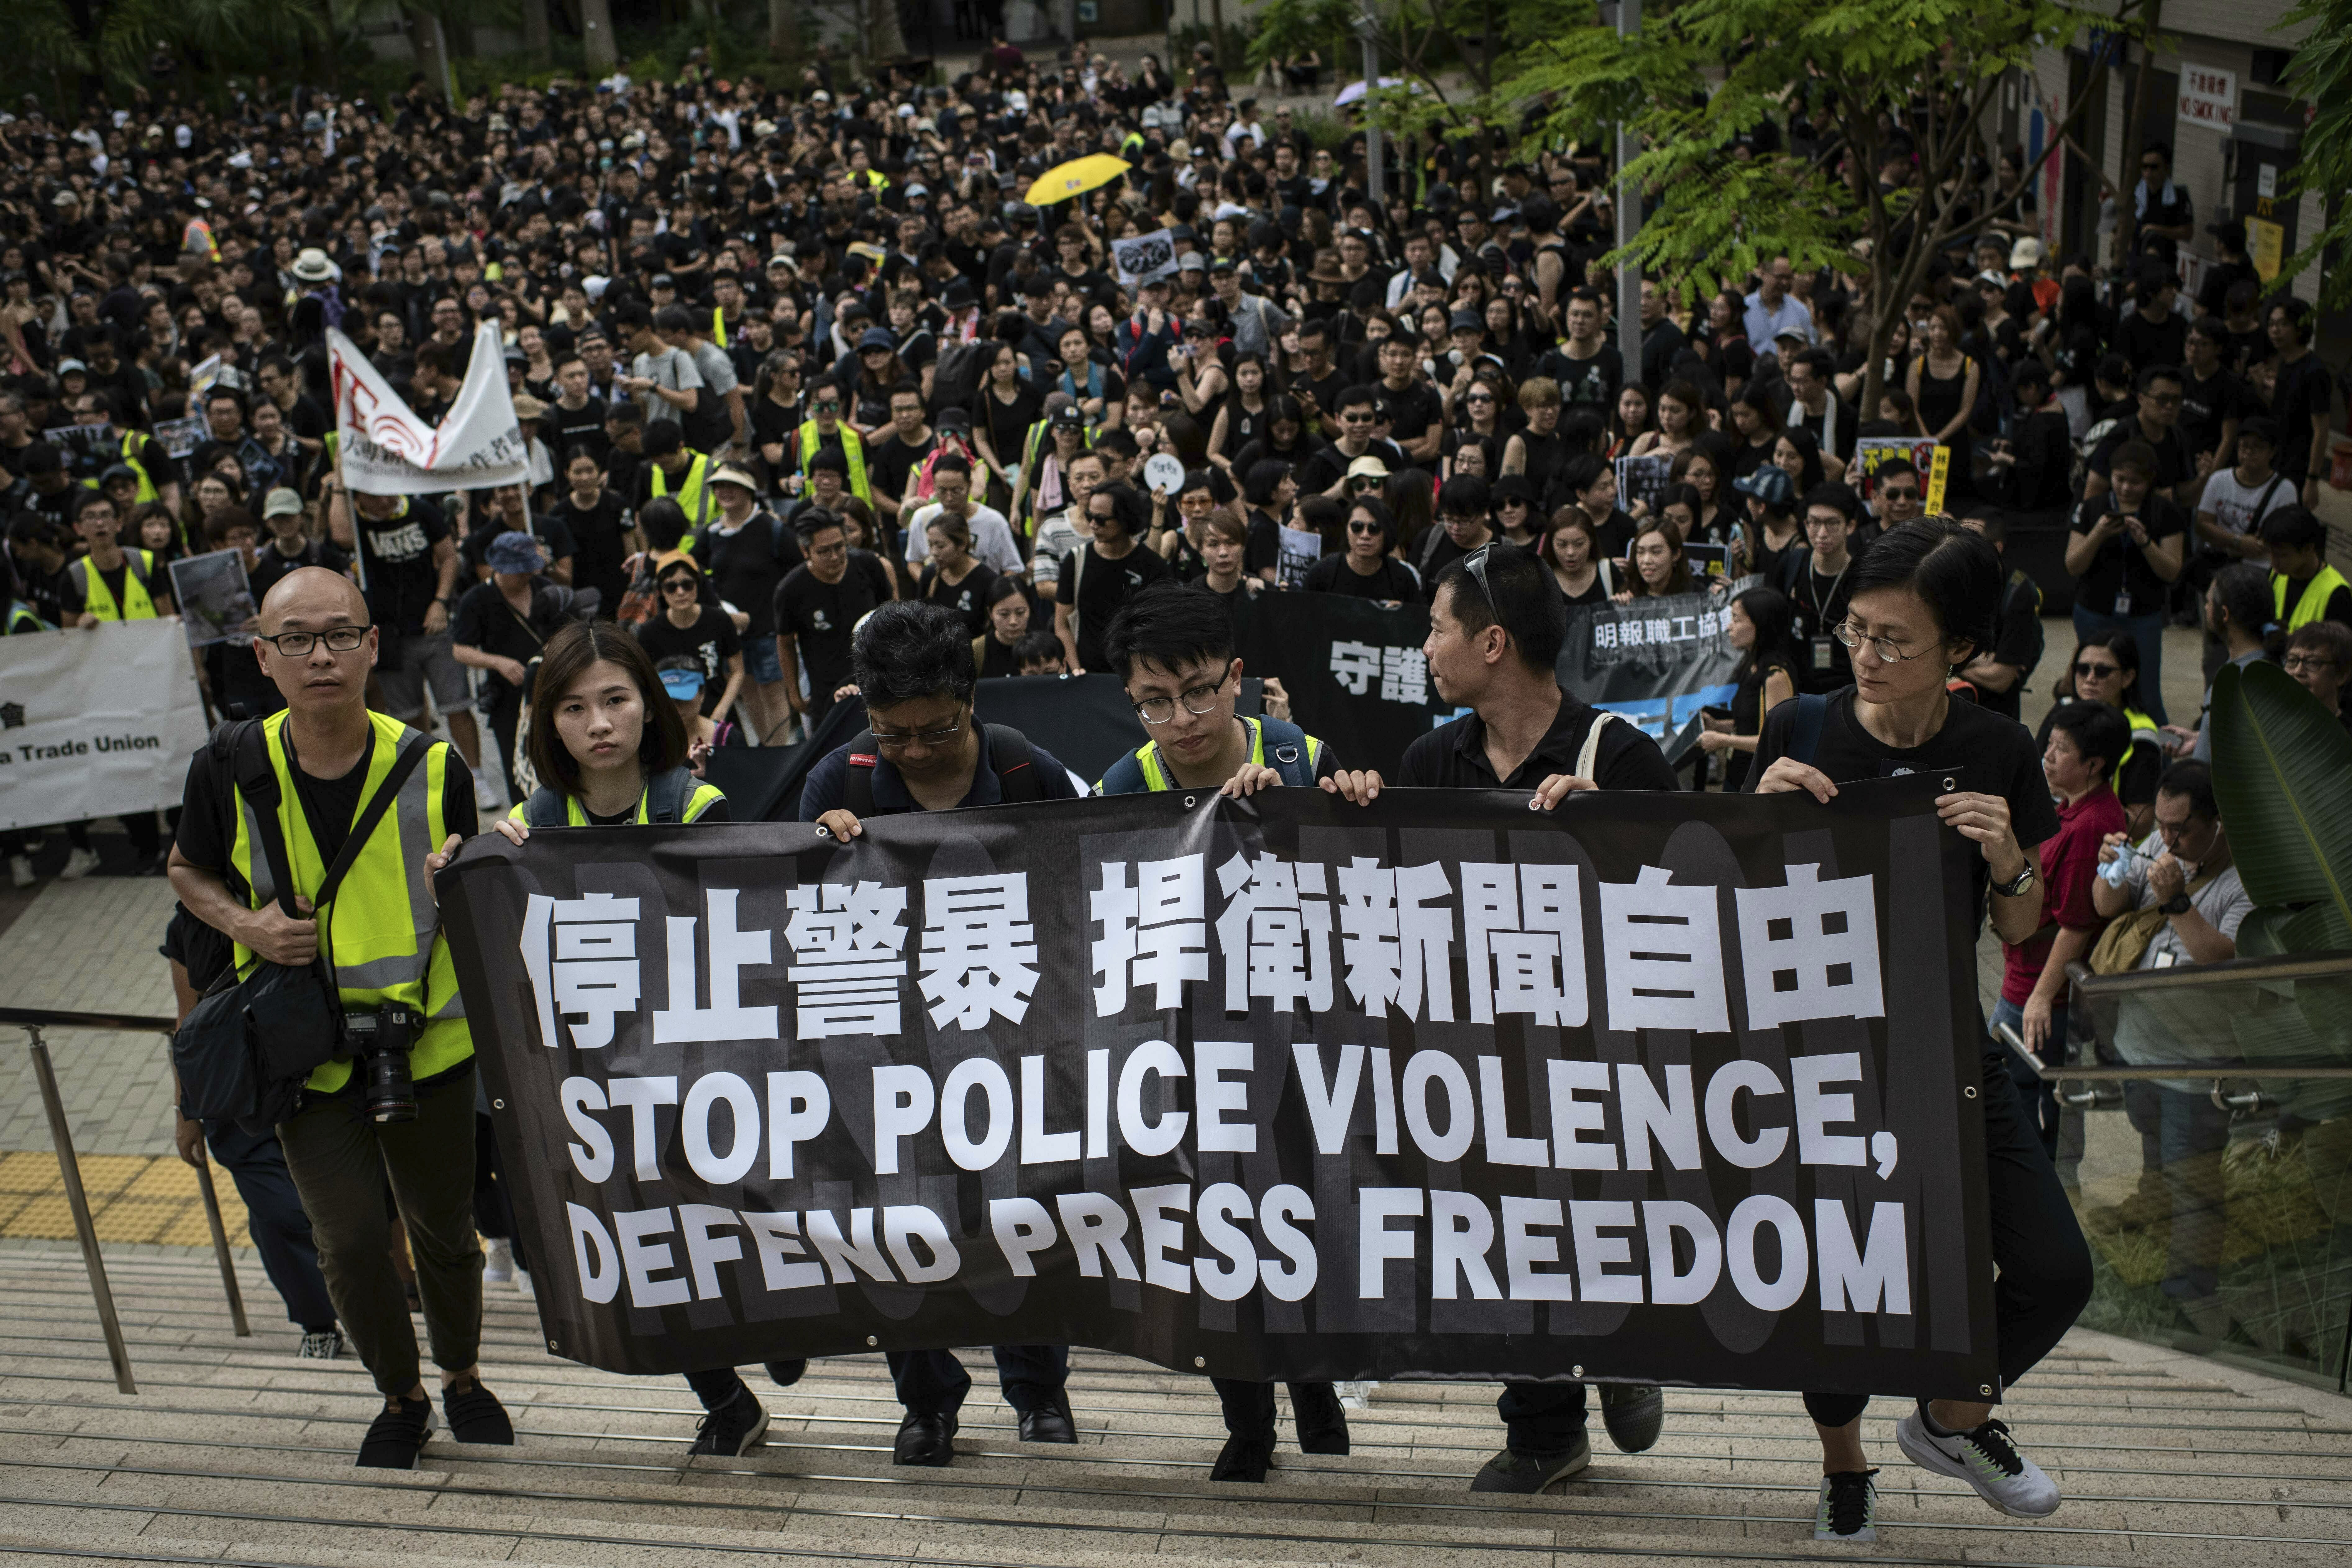 Protesters hold a banner during a march, organized by media groups and journalist trade unions, calling for press freedom amidst the ongoing protests in Hong Kong. In addition to political pressure, journalists have increasingly been the targets of physical and verbal assaults from police